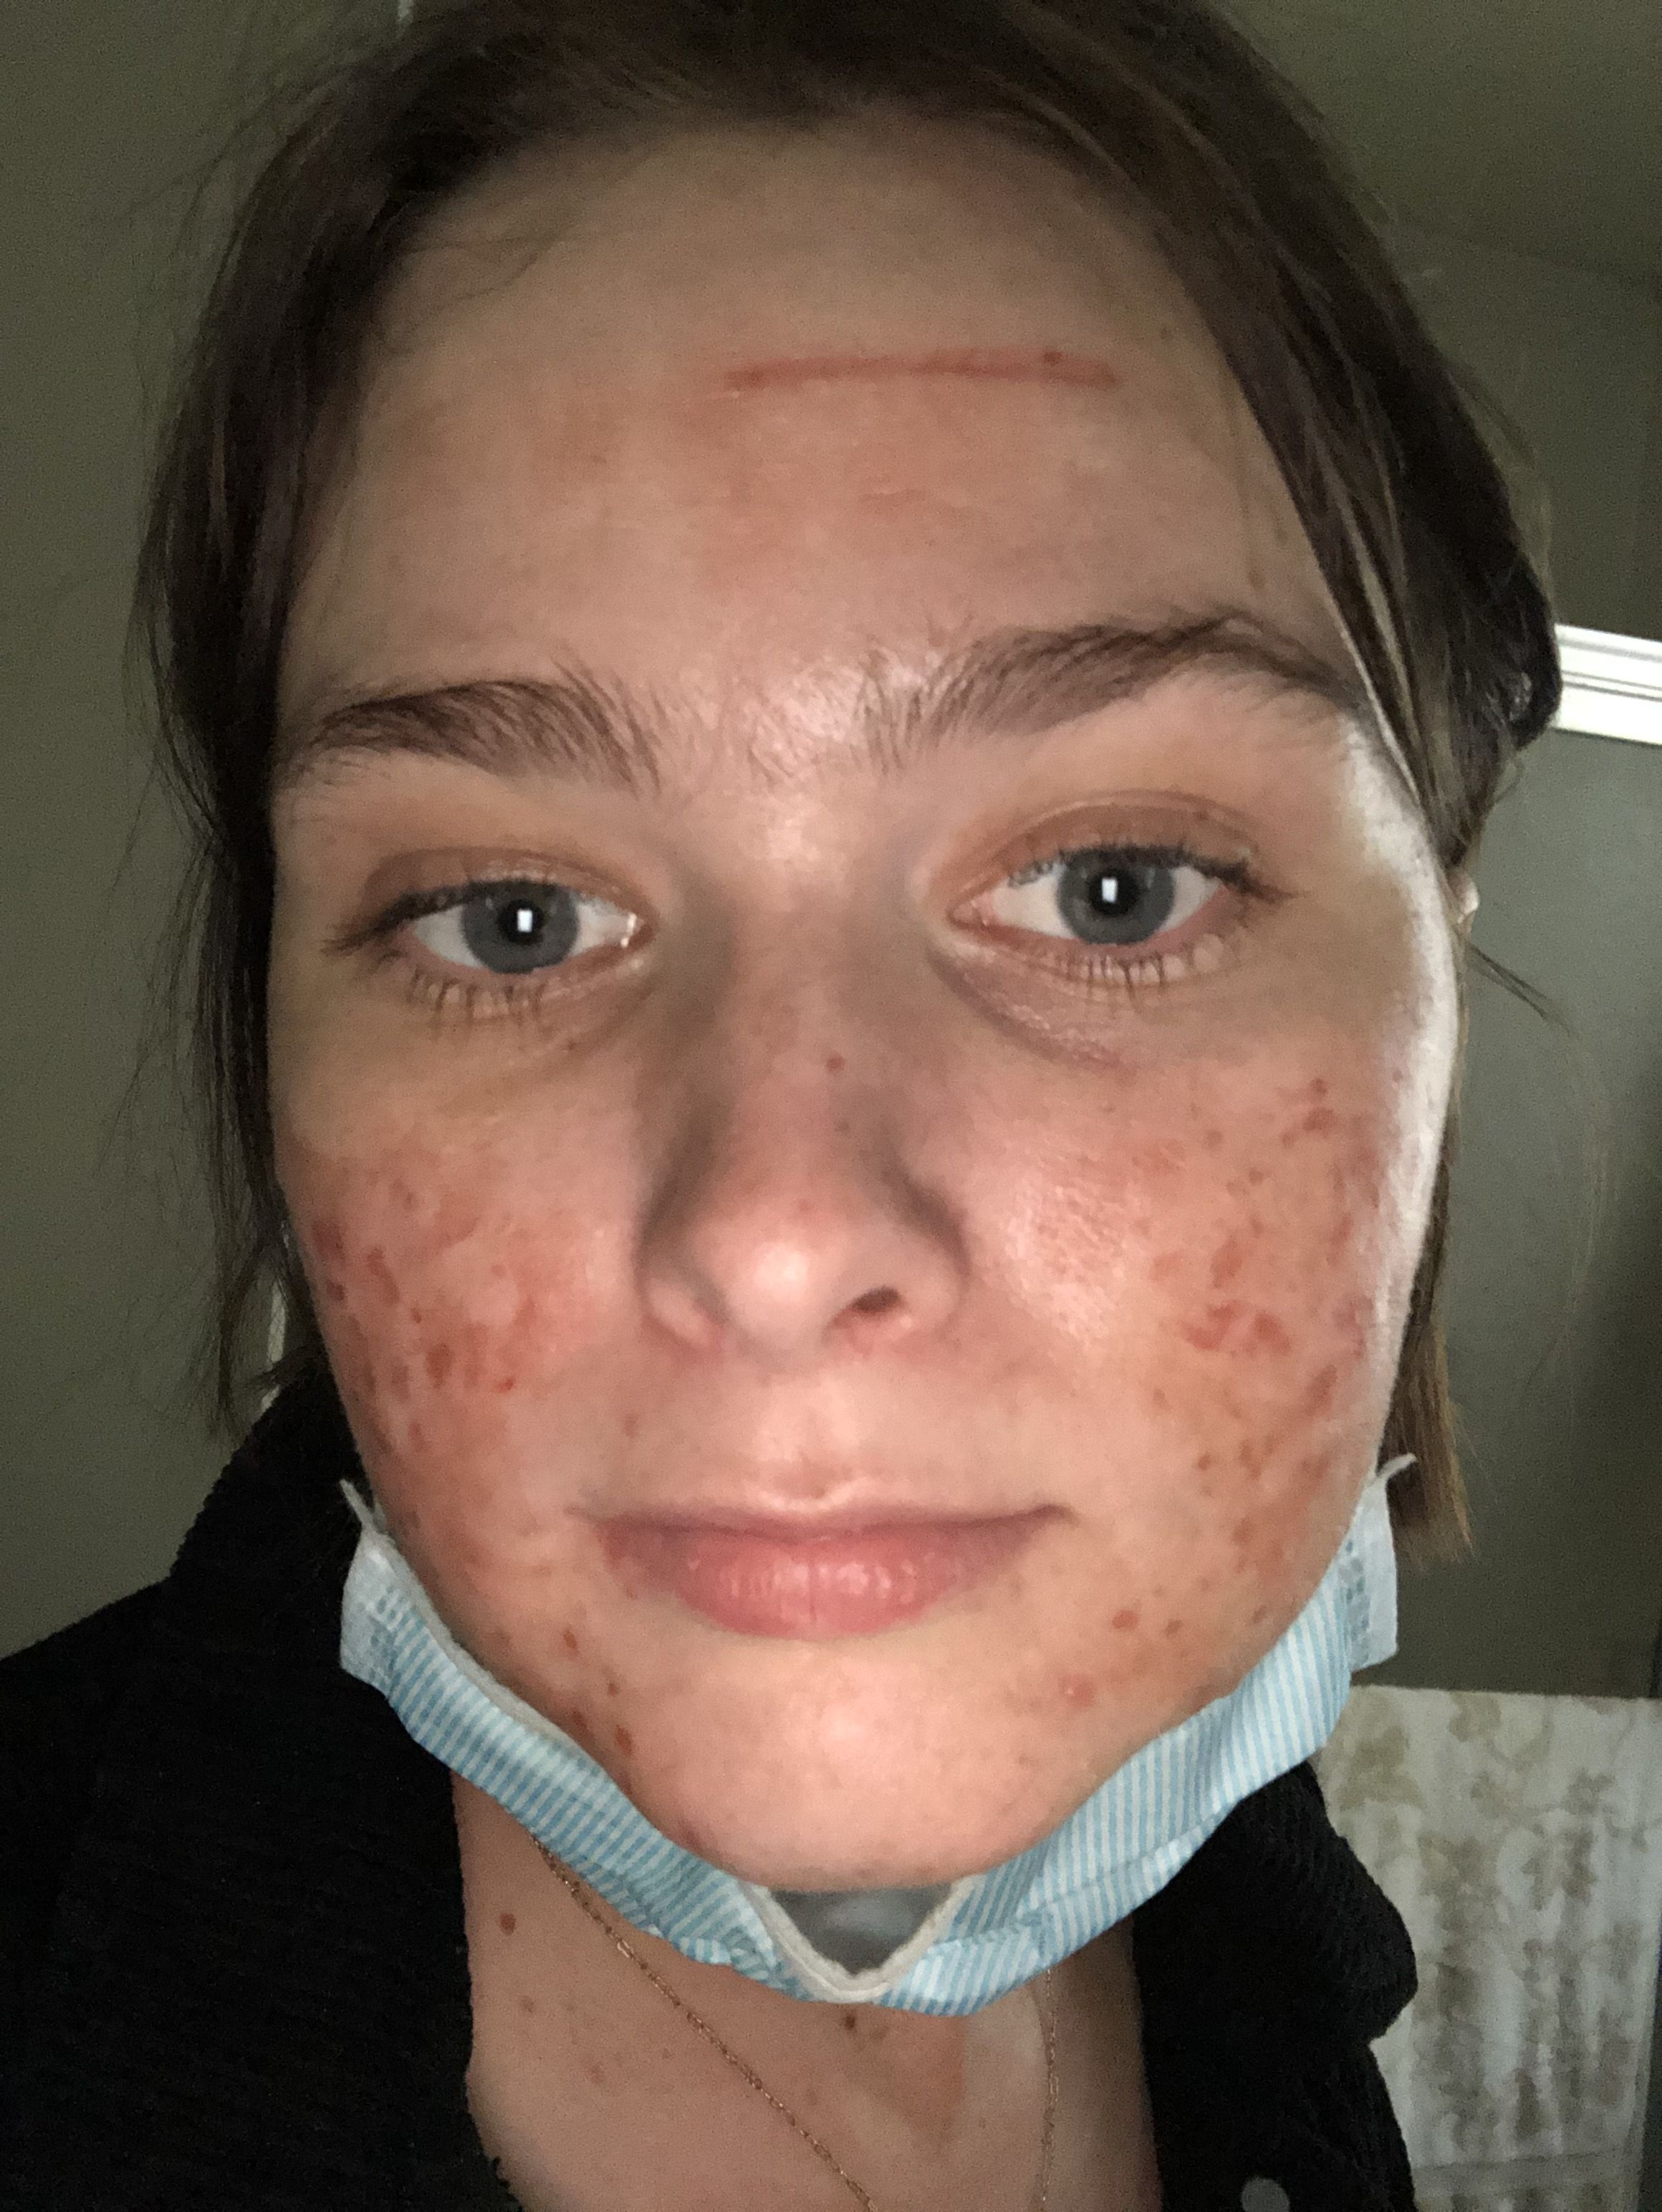 CO2 laser in treating acne scars – ultrapulse & Subcision of Acne Scars W/ Dr  Lim Dr Rullan and Other Drs – Success Story in Progress – Page 3 – Scar  treatments –  Forum